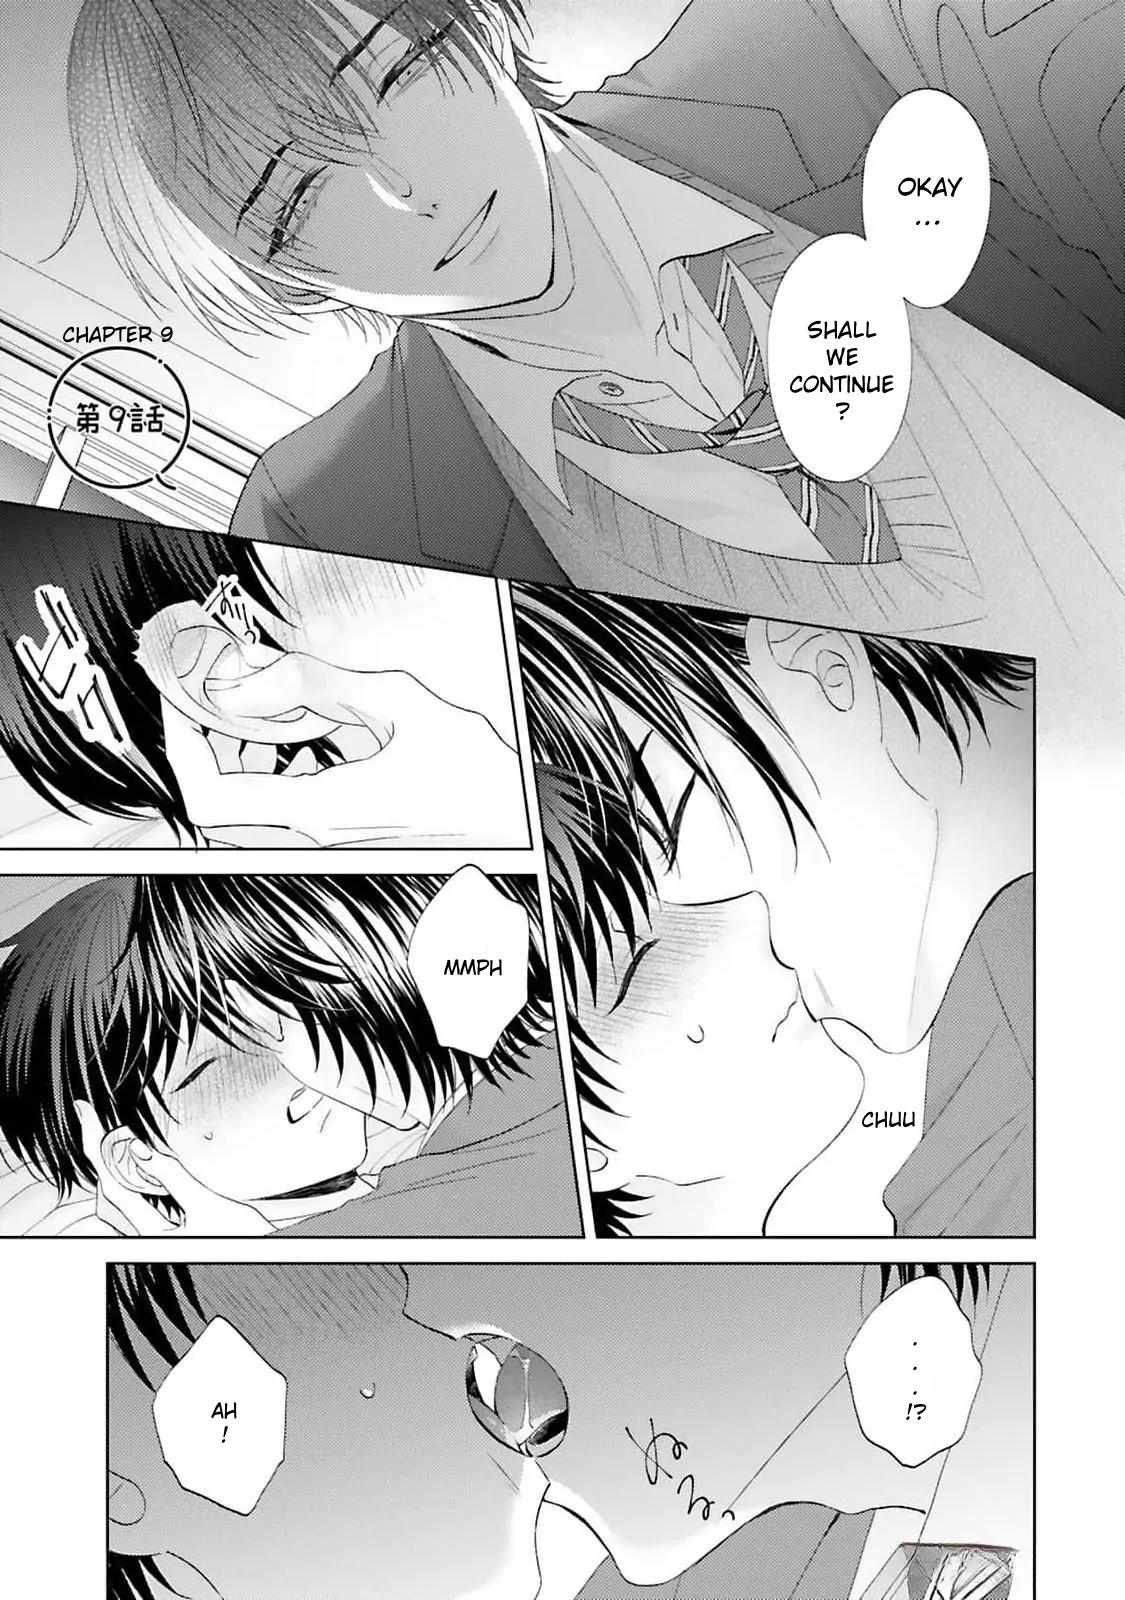 My Cutie Pie -An Ordinary Boy And His Gorgeous Childhood Friend- 〘Official〙 - chapter 9 - #4